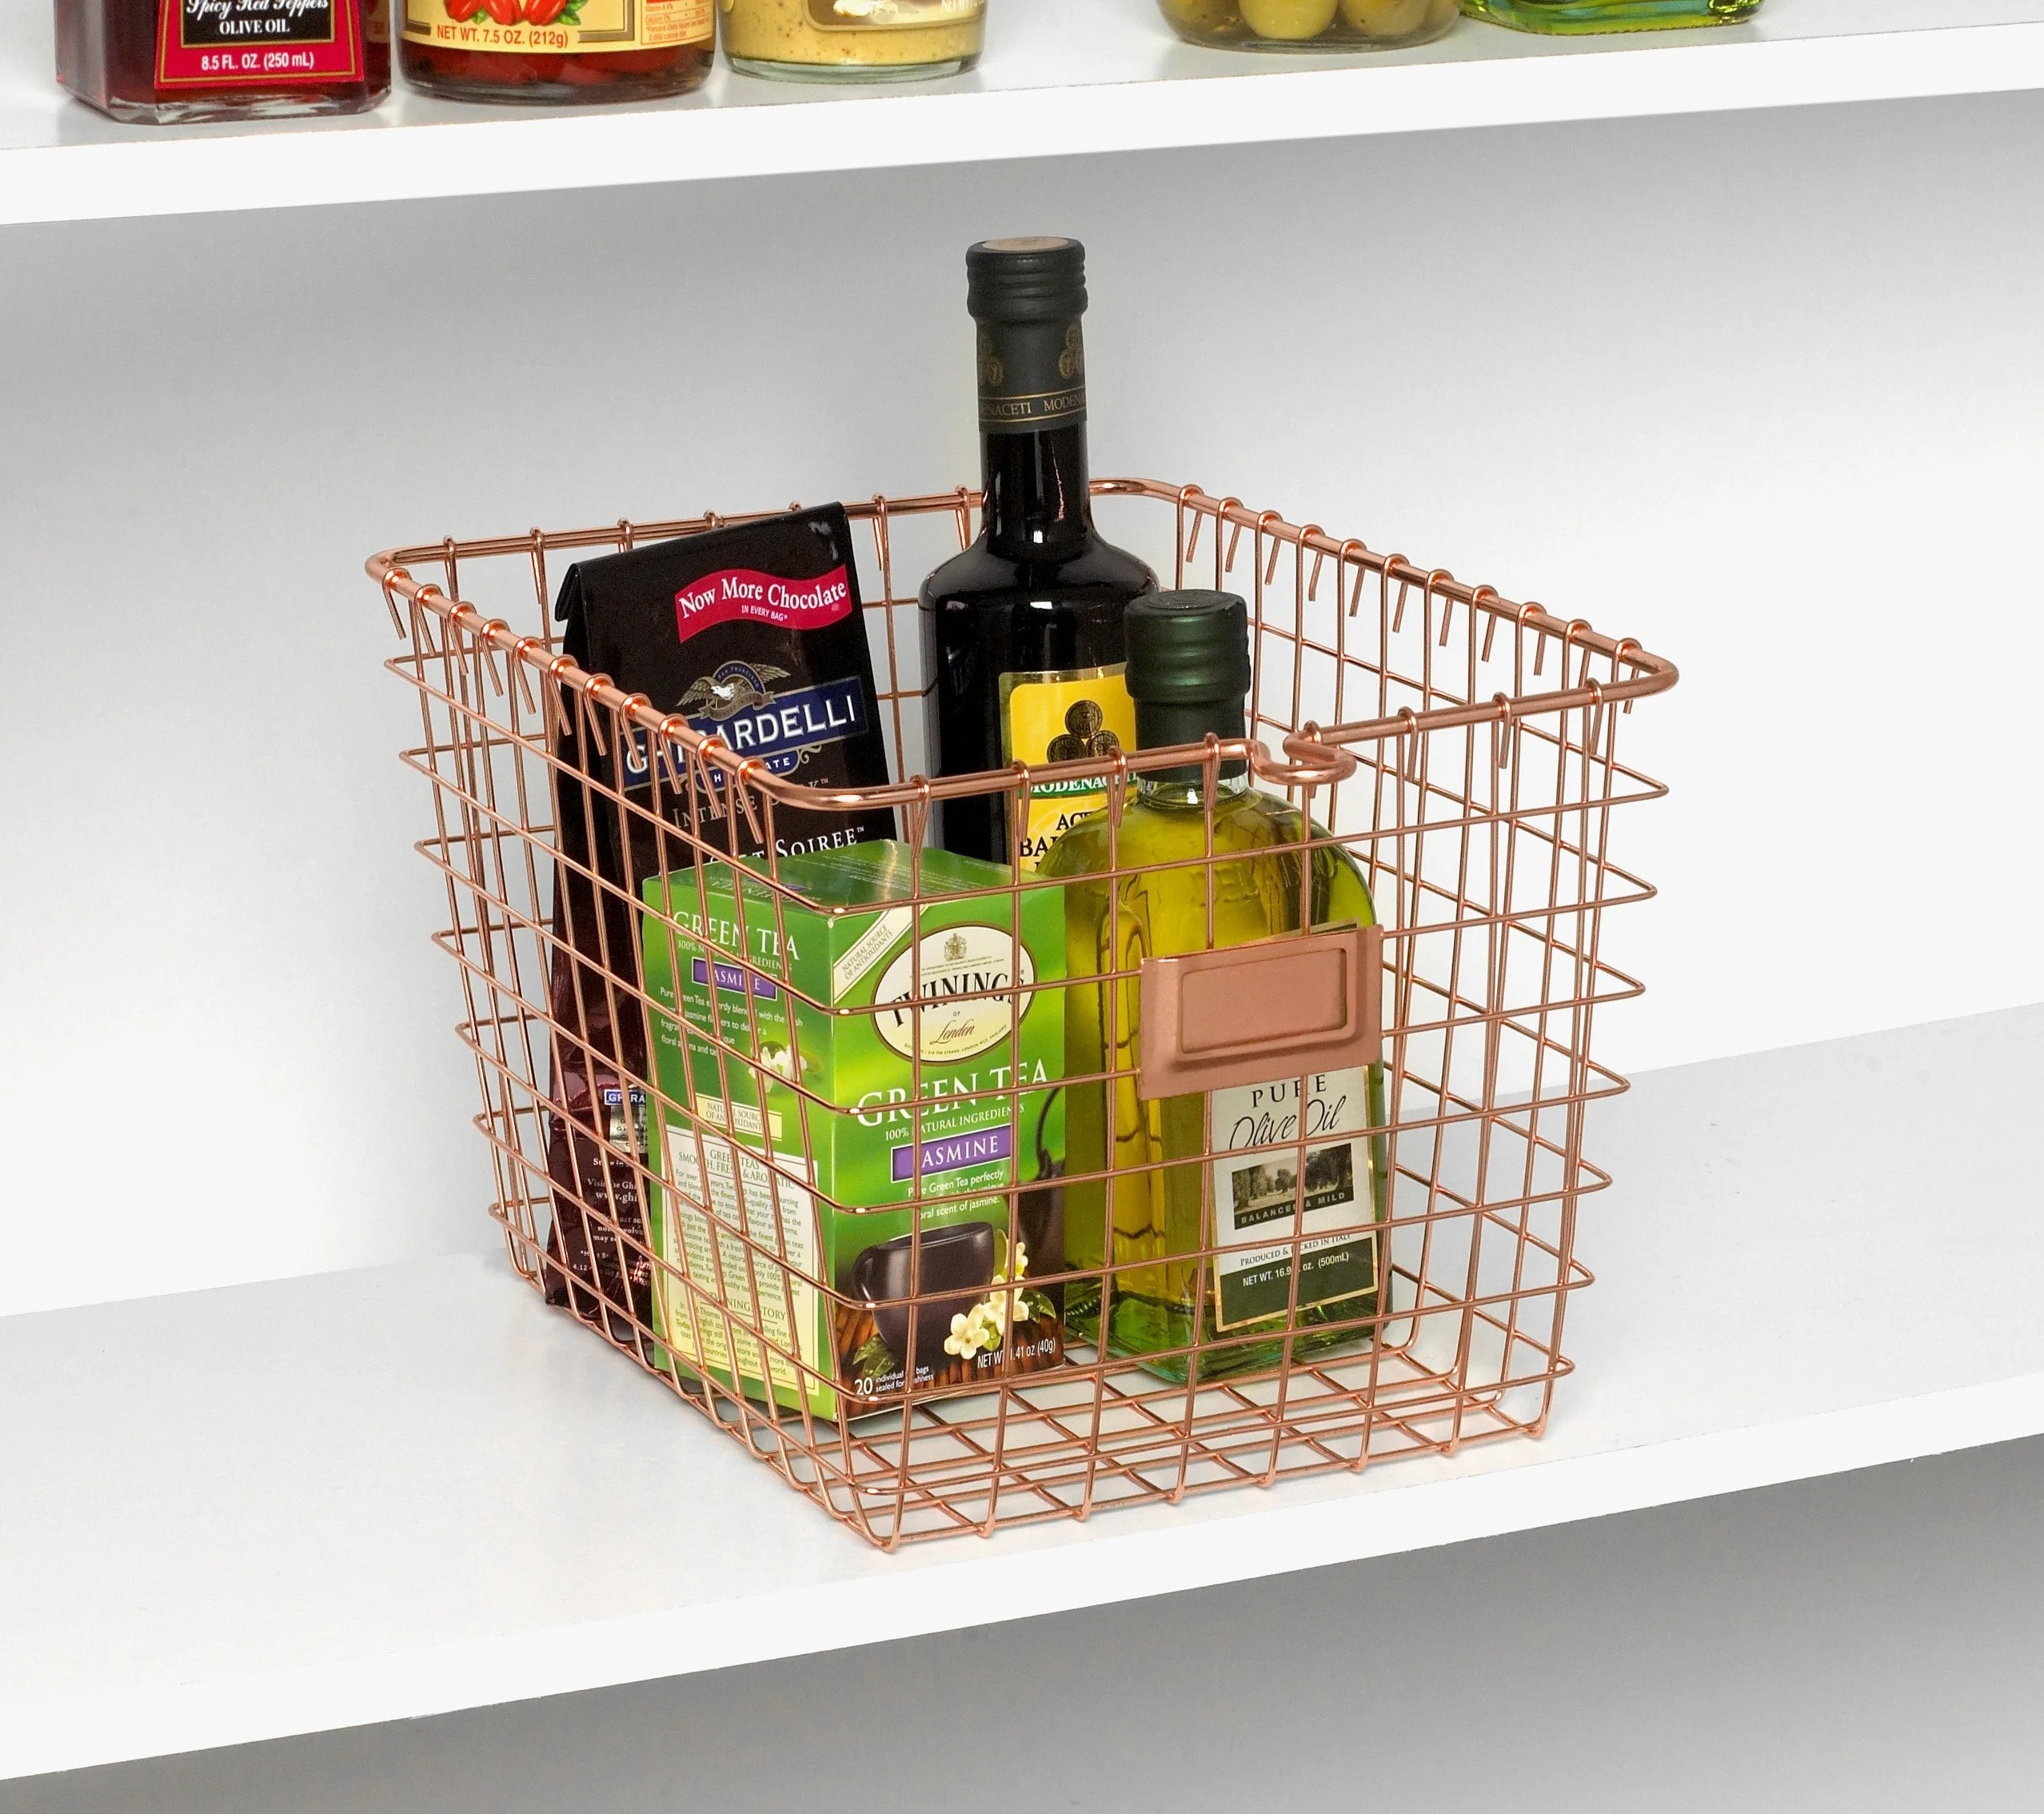 The basket in rose gold holding chocolate, tea, and olive oil